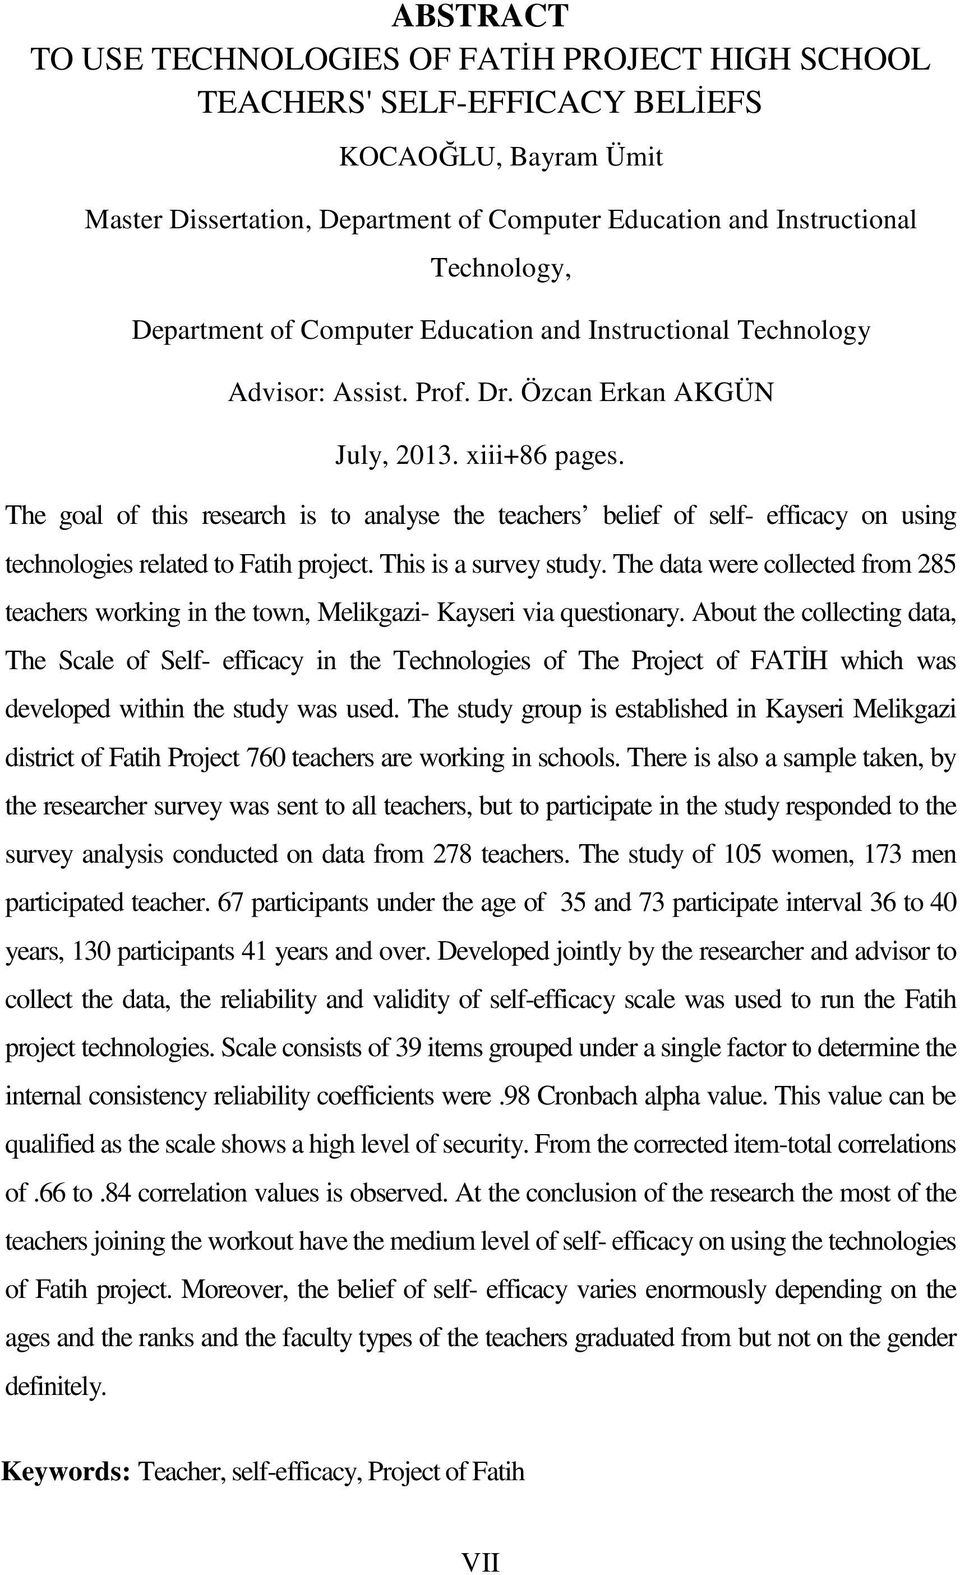 The goal of this research is to analyse the teachers belief of self- efficacy on using technologies related to Fatih project. This is a survey study.